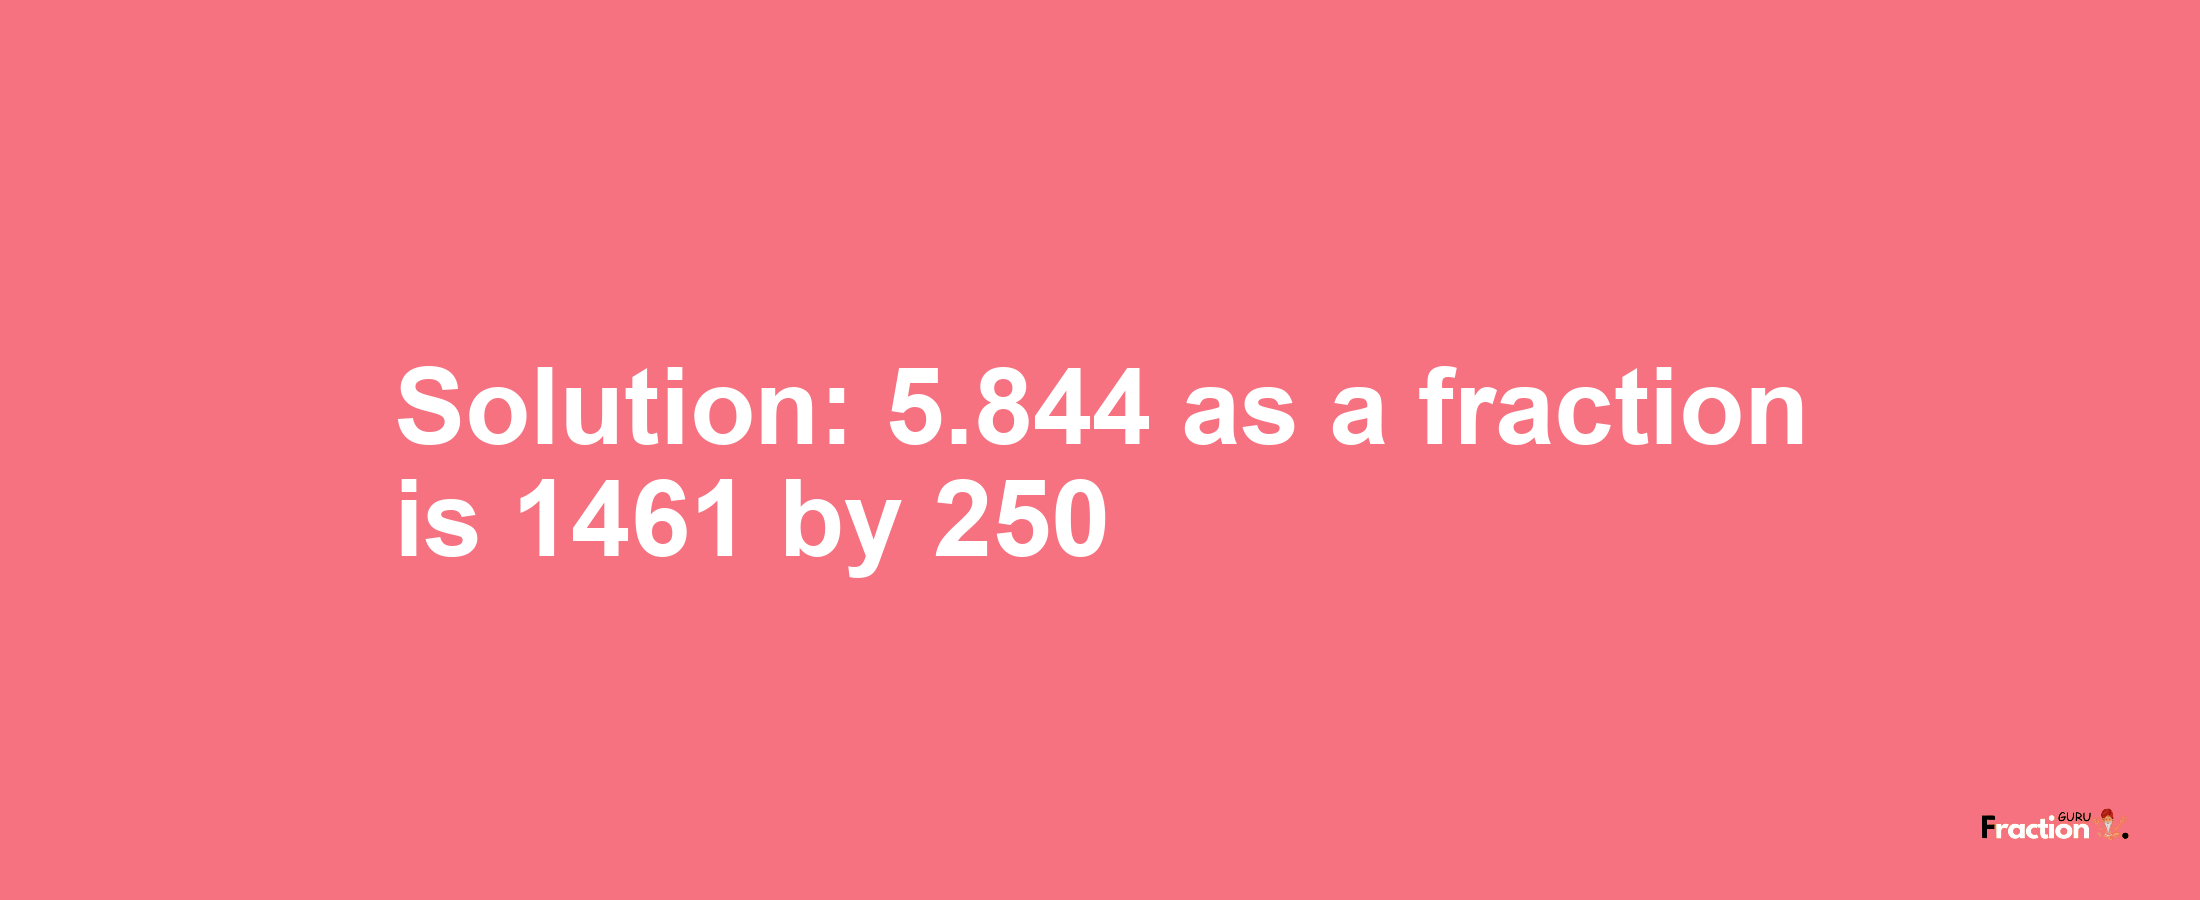 Solution:5.844 as a fraction is 1461/250